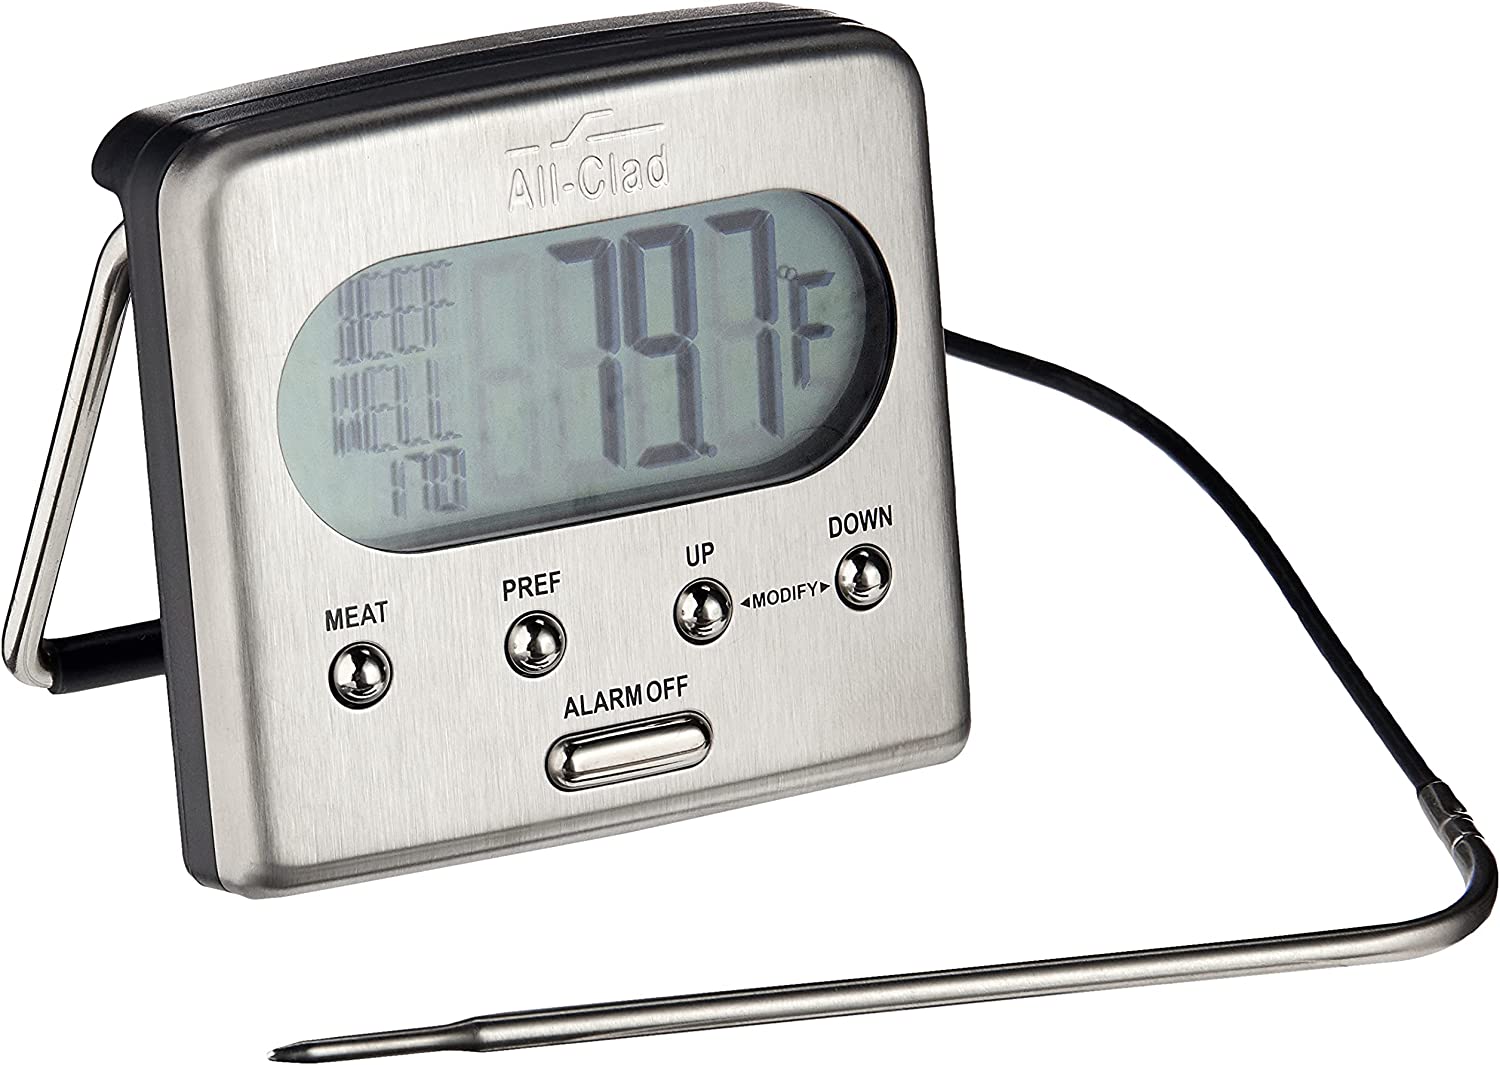 All-Clad Digital Stainless Steel Oven Probe Thermometer $25 at Amazon